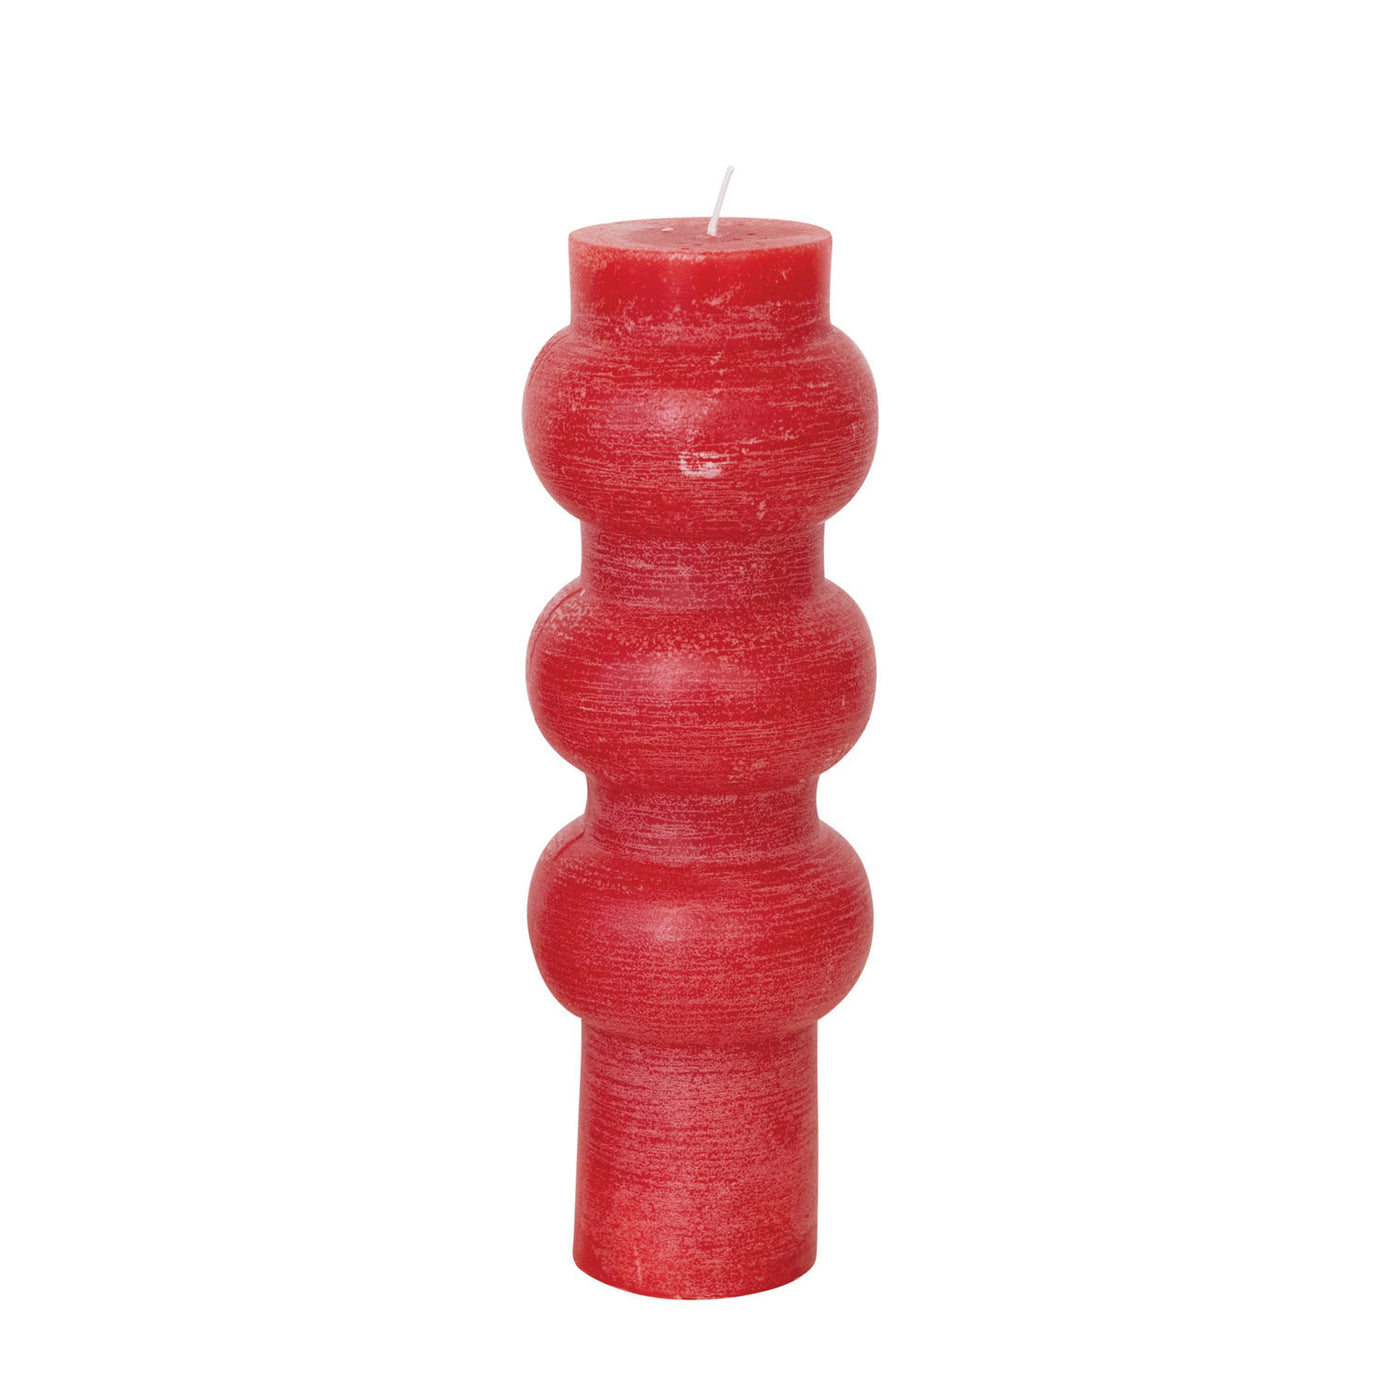 Statement Red Geometric Candle